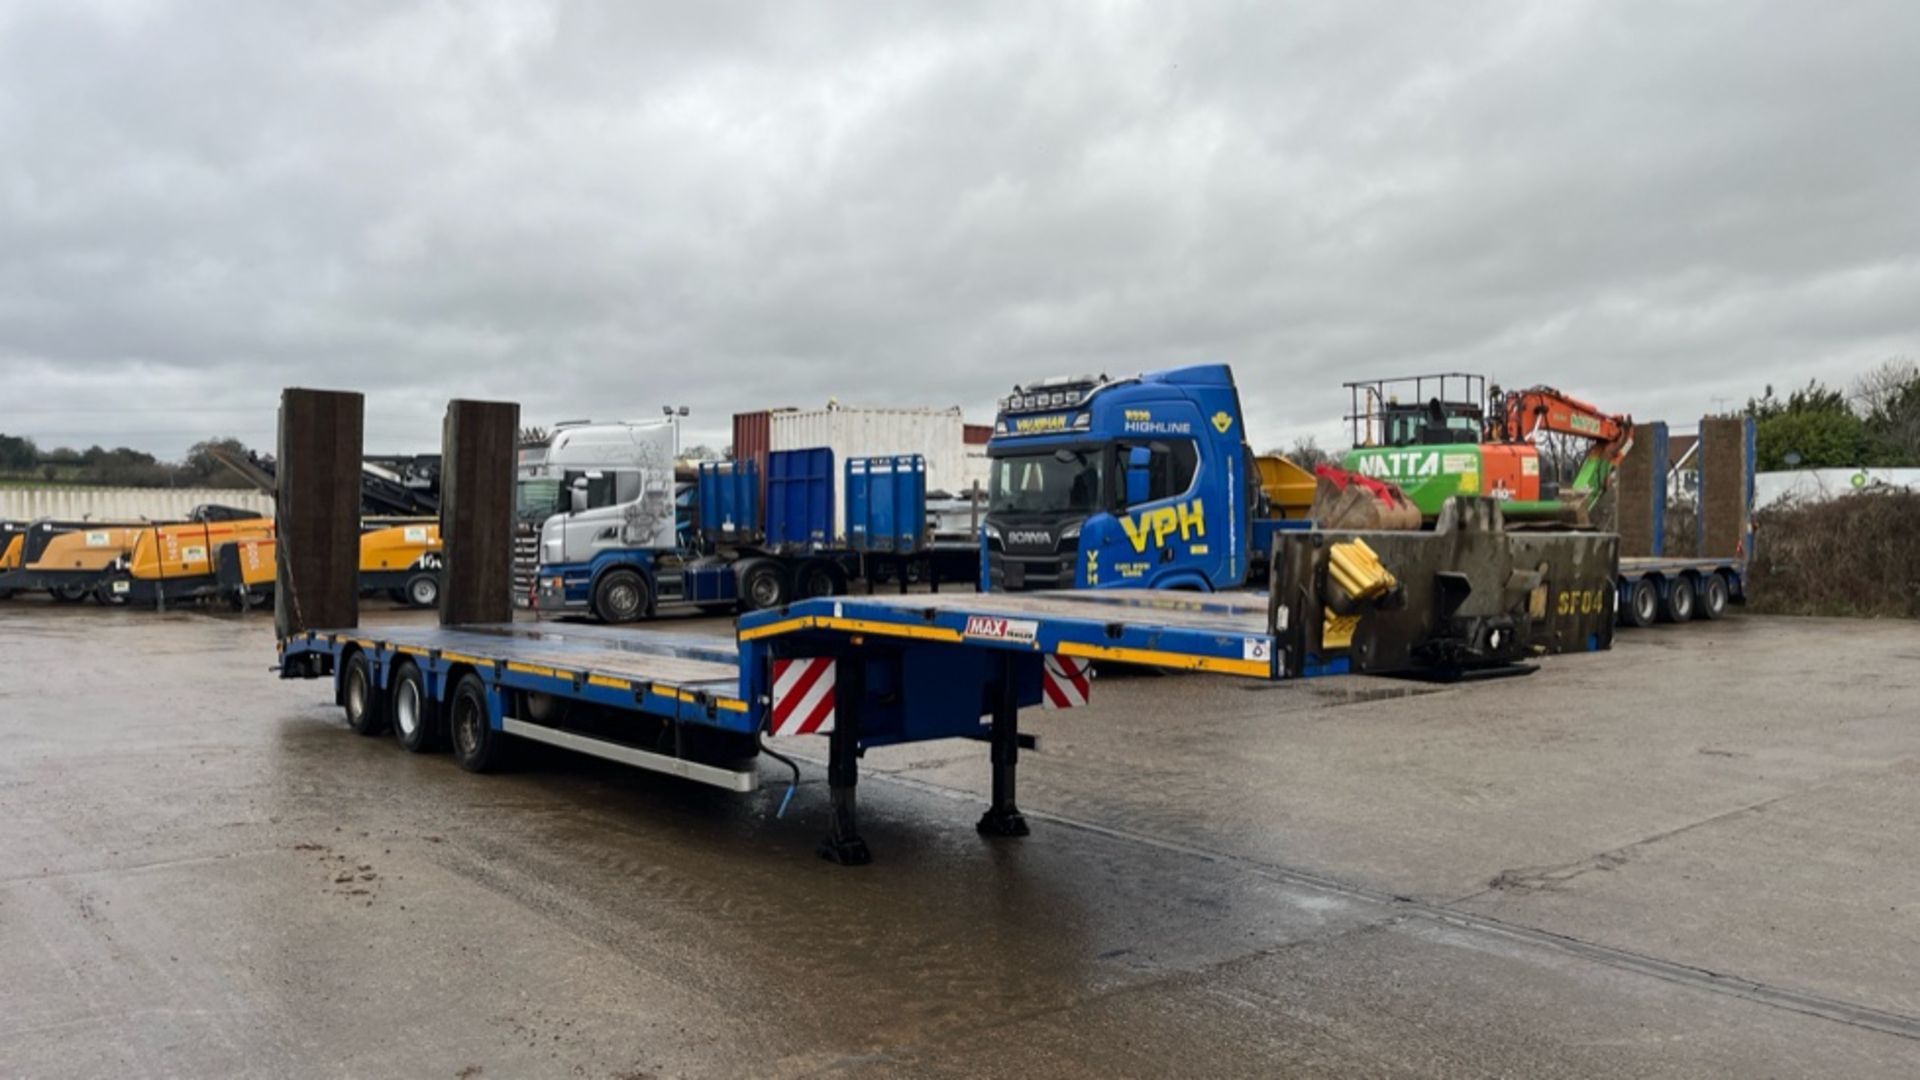 FAYMONVILLE MAX 100 - EXTENDABLE SEMI LOW LOADER Trailer (Year 2016) - Image 2 of 27